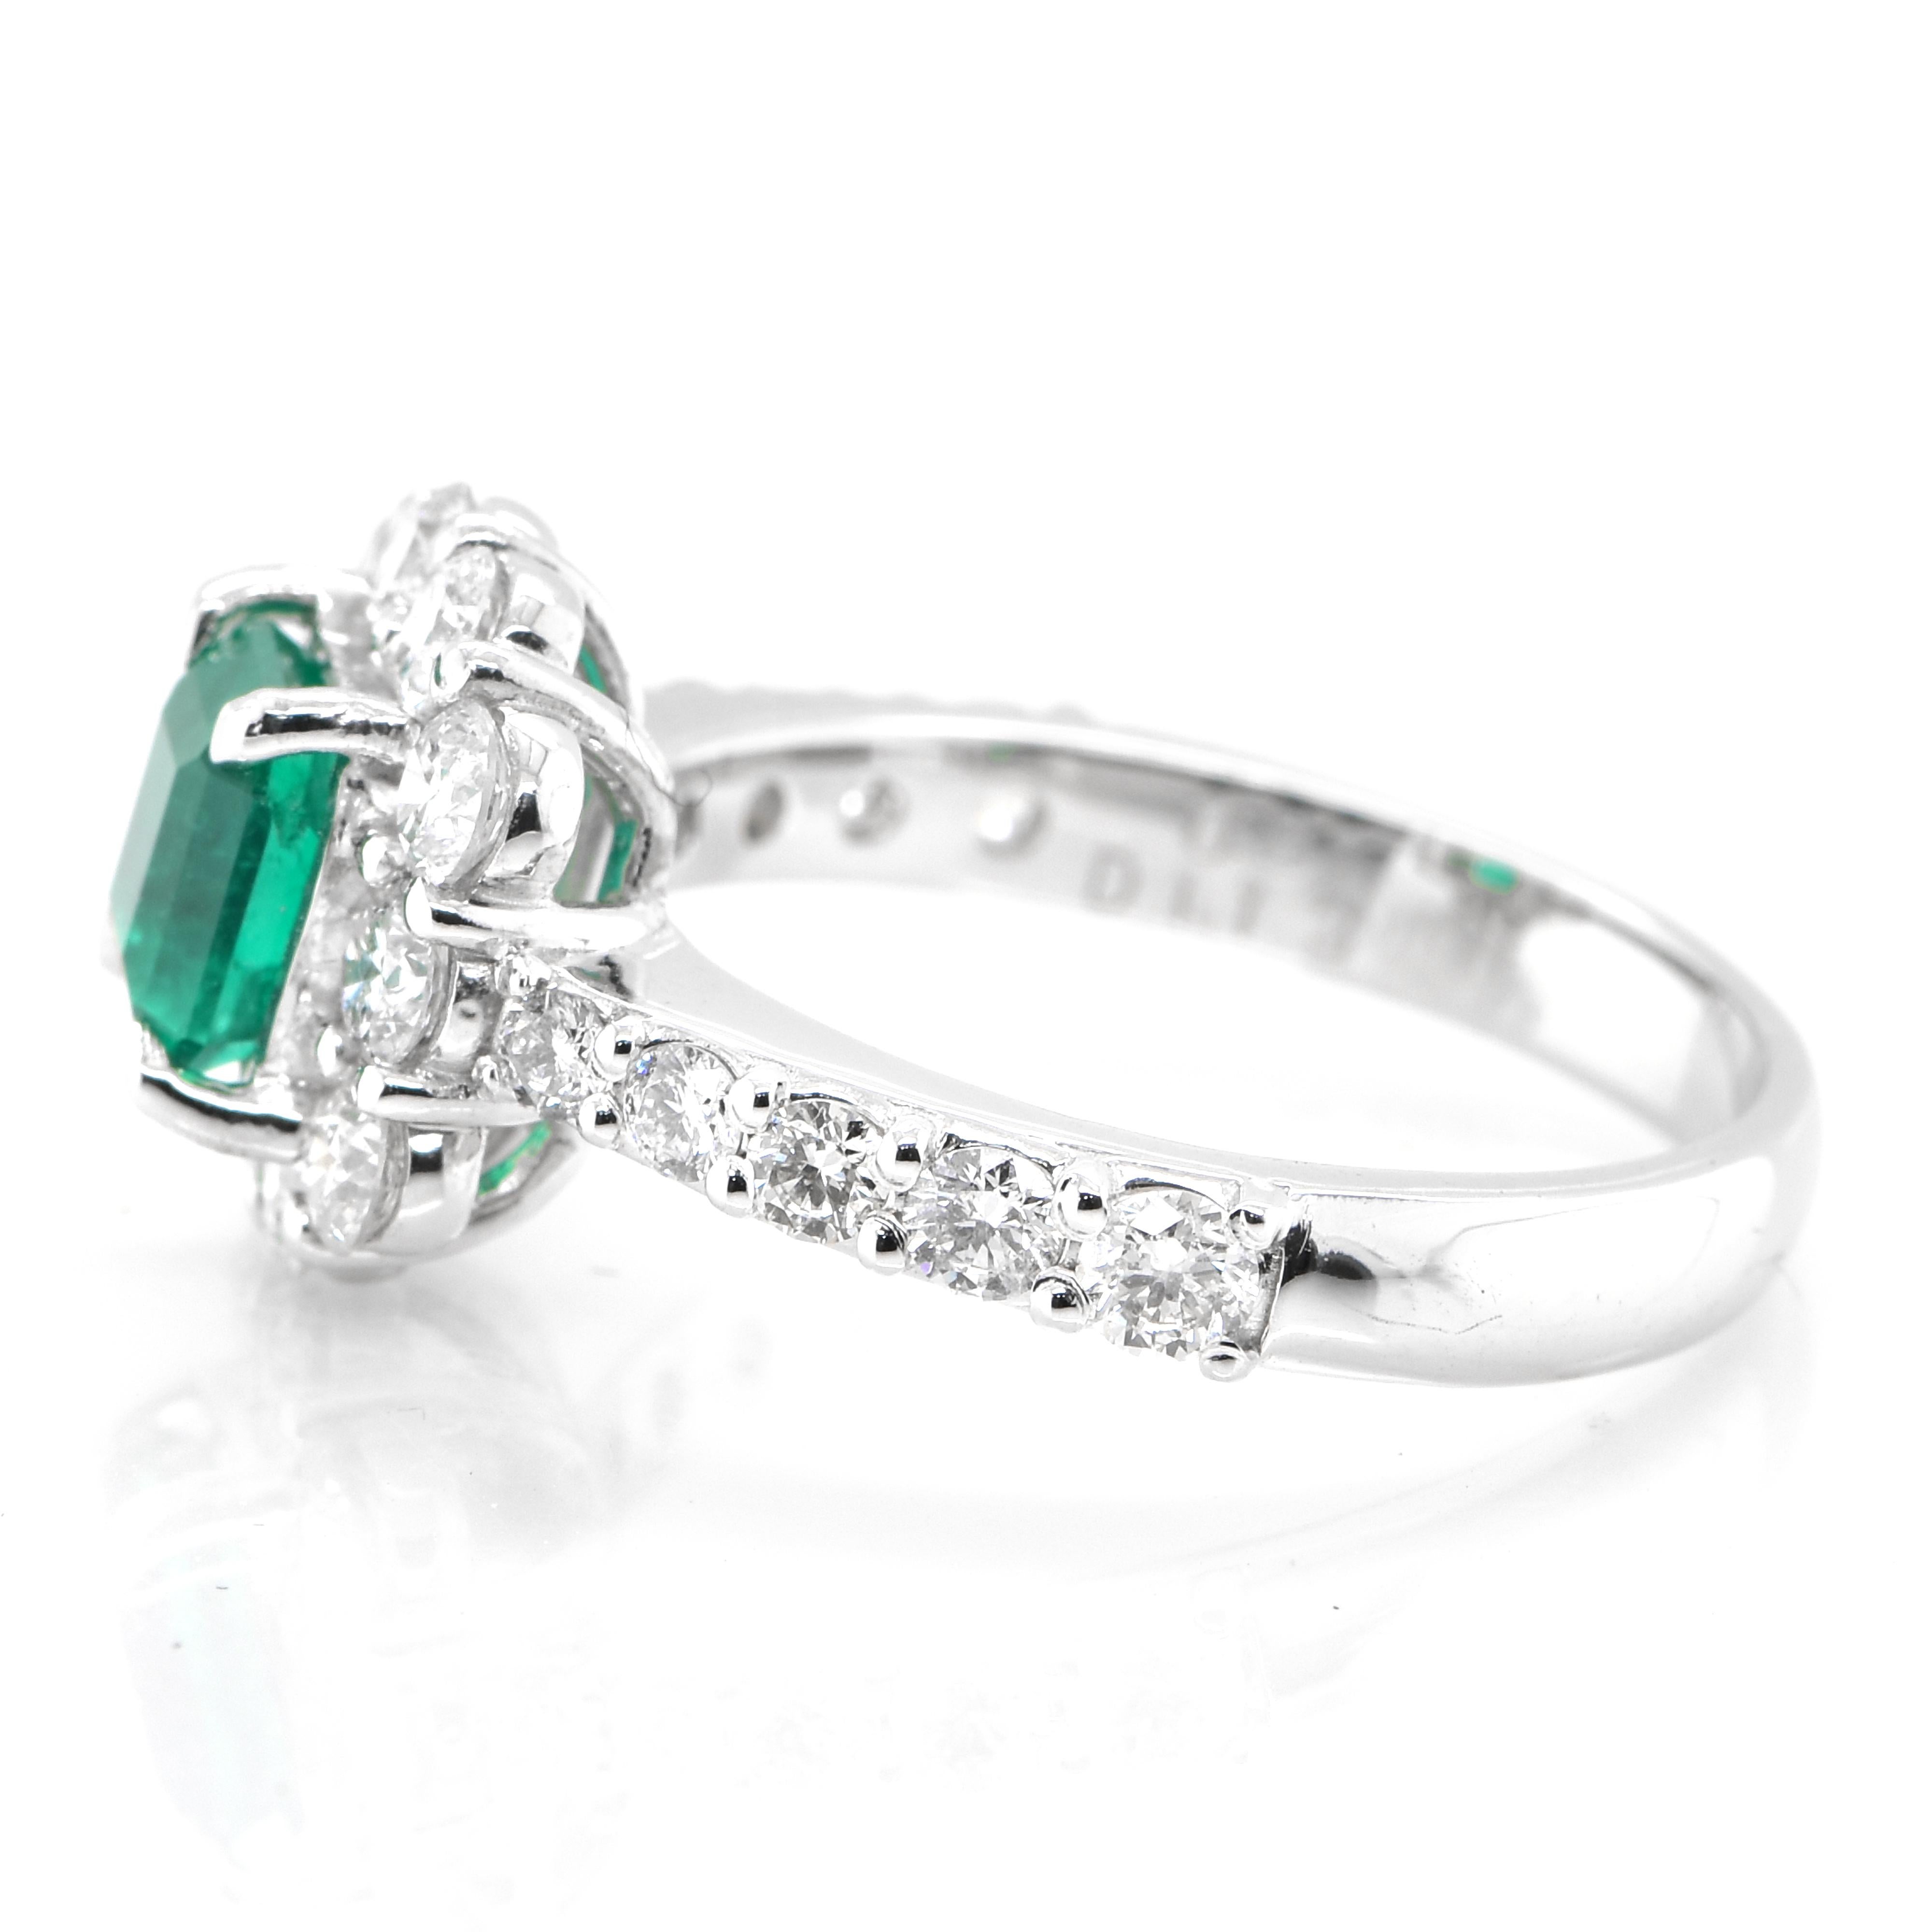 Emerald Cut 0.91 Carat Natural Colombian Emerald and Diamond Ring Made in Platinum For Sale